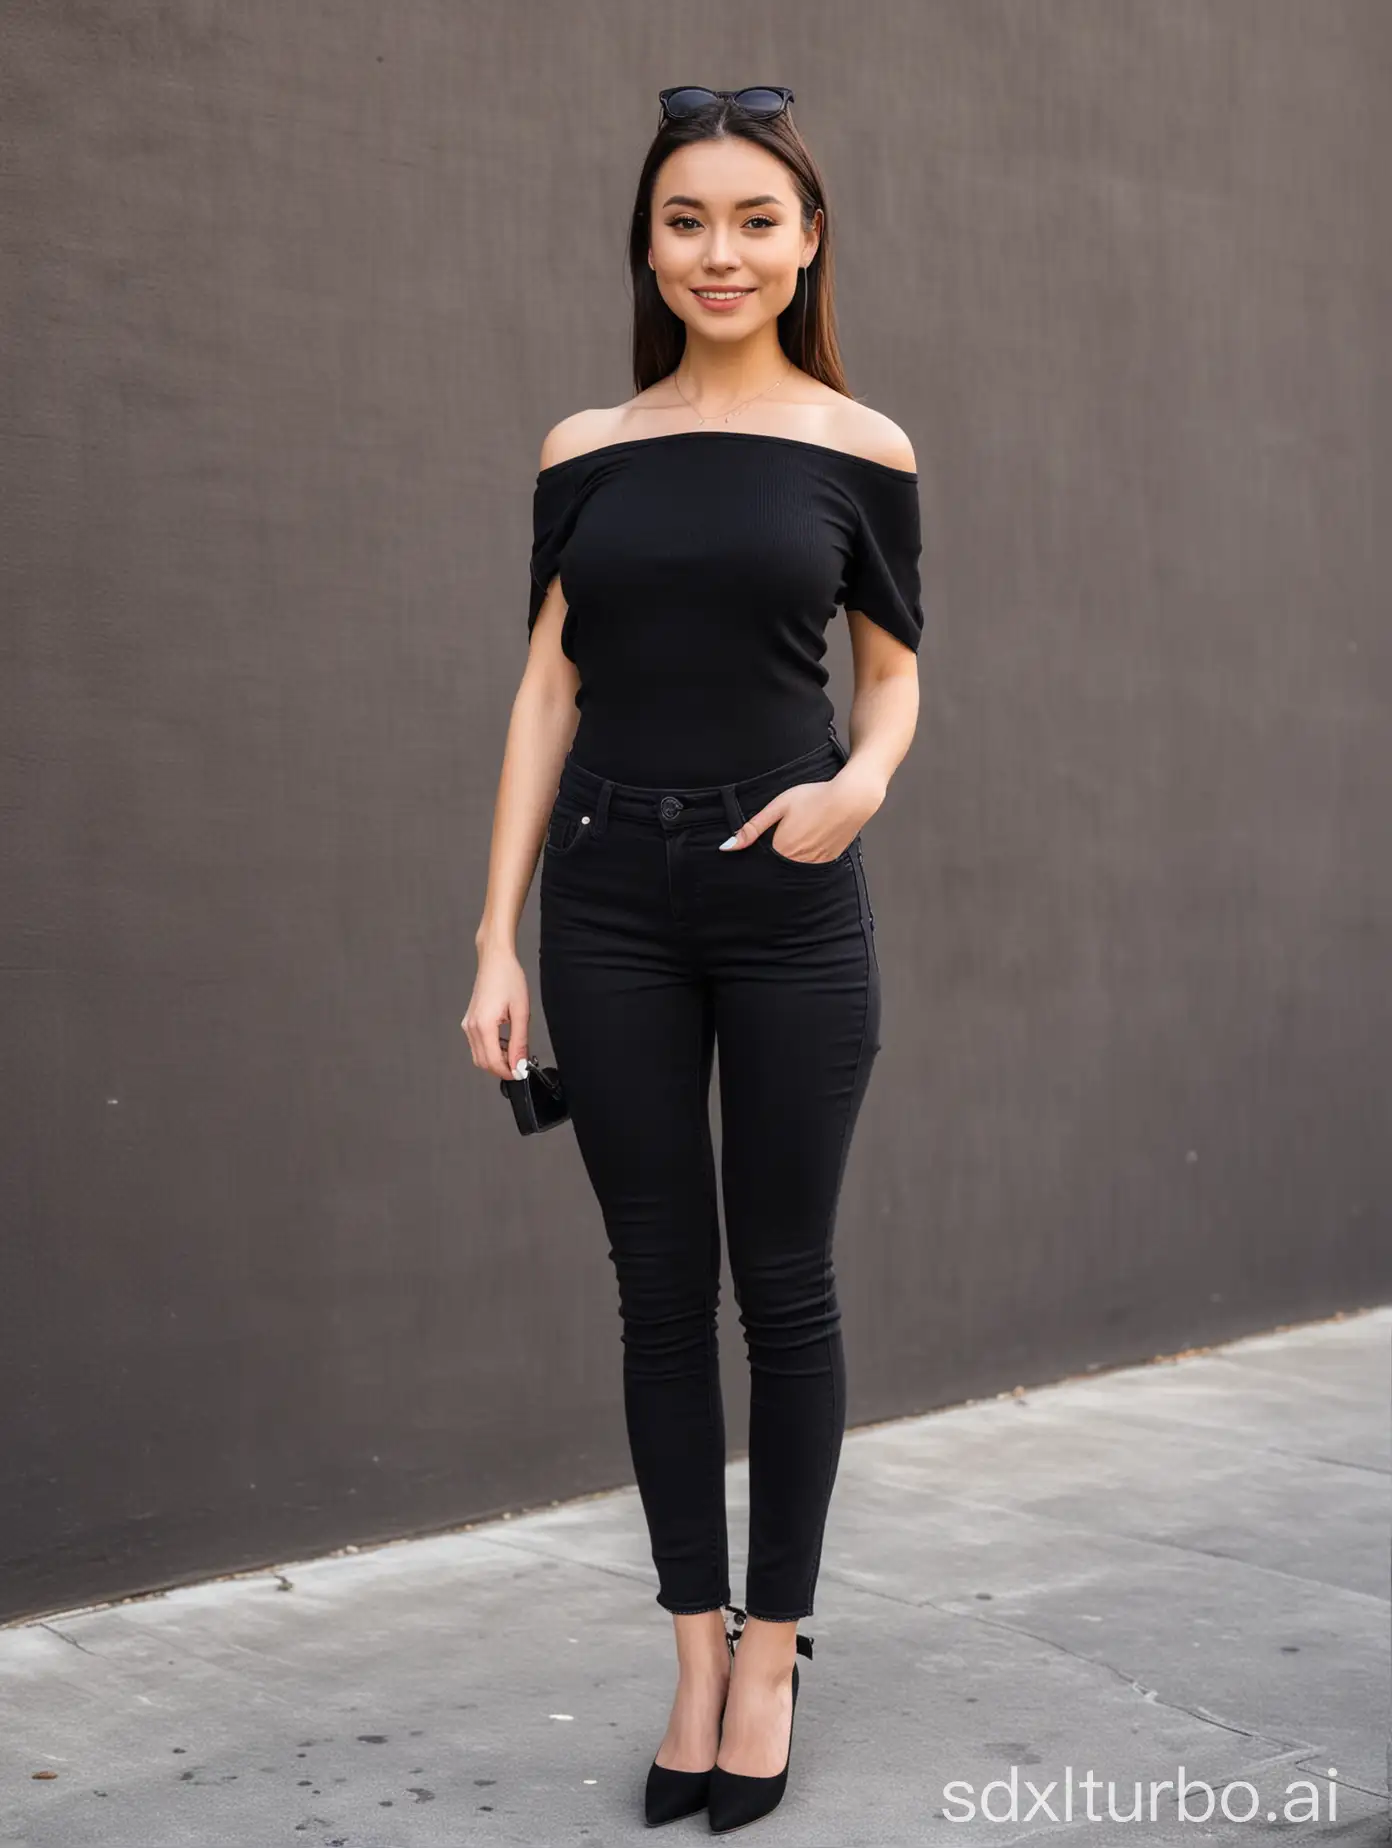 young petite woman with small body in black top and black skinny jeans